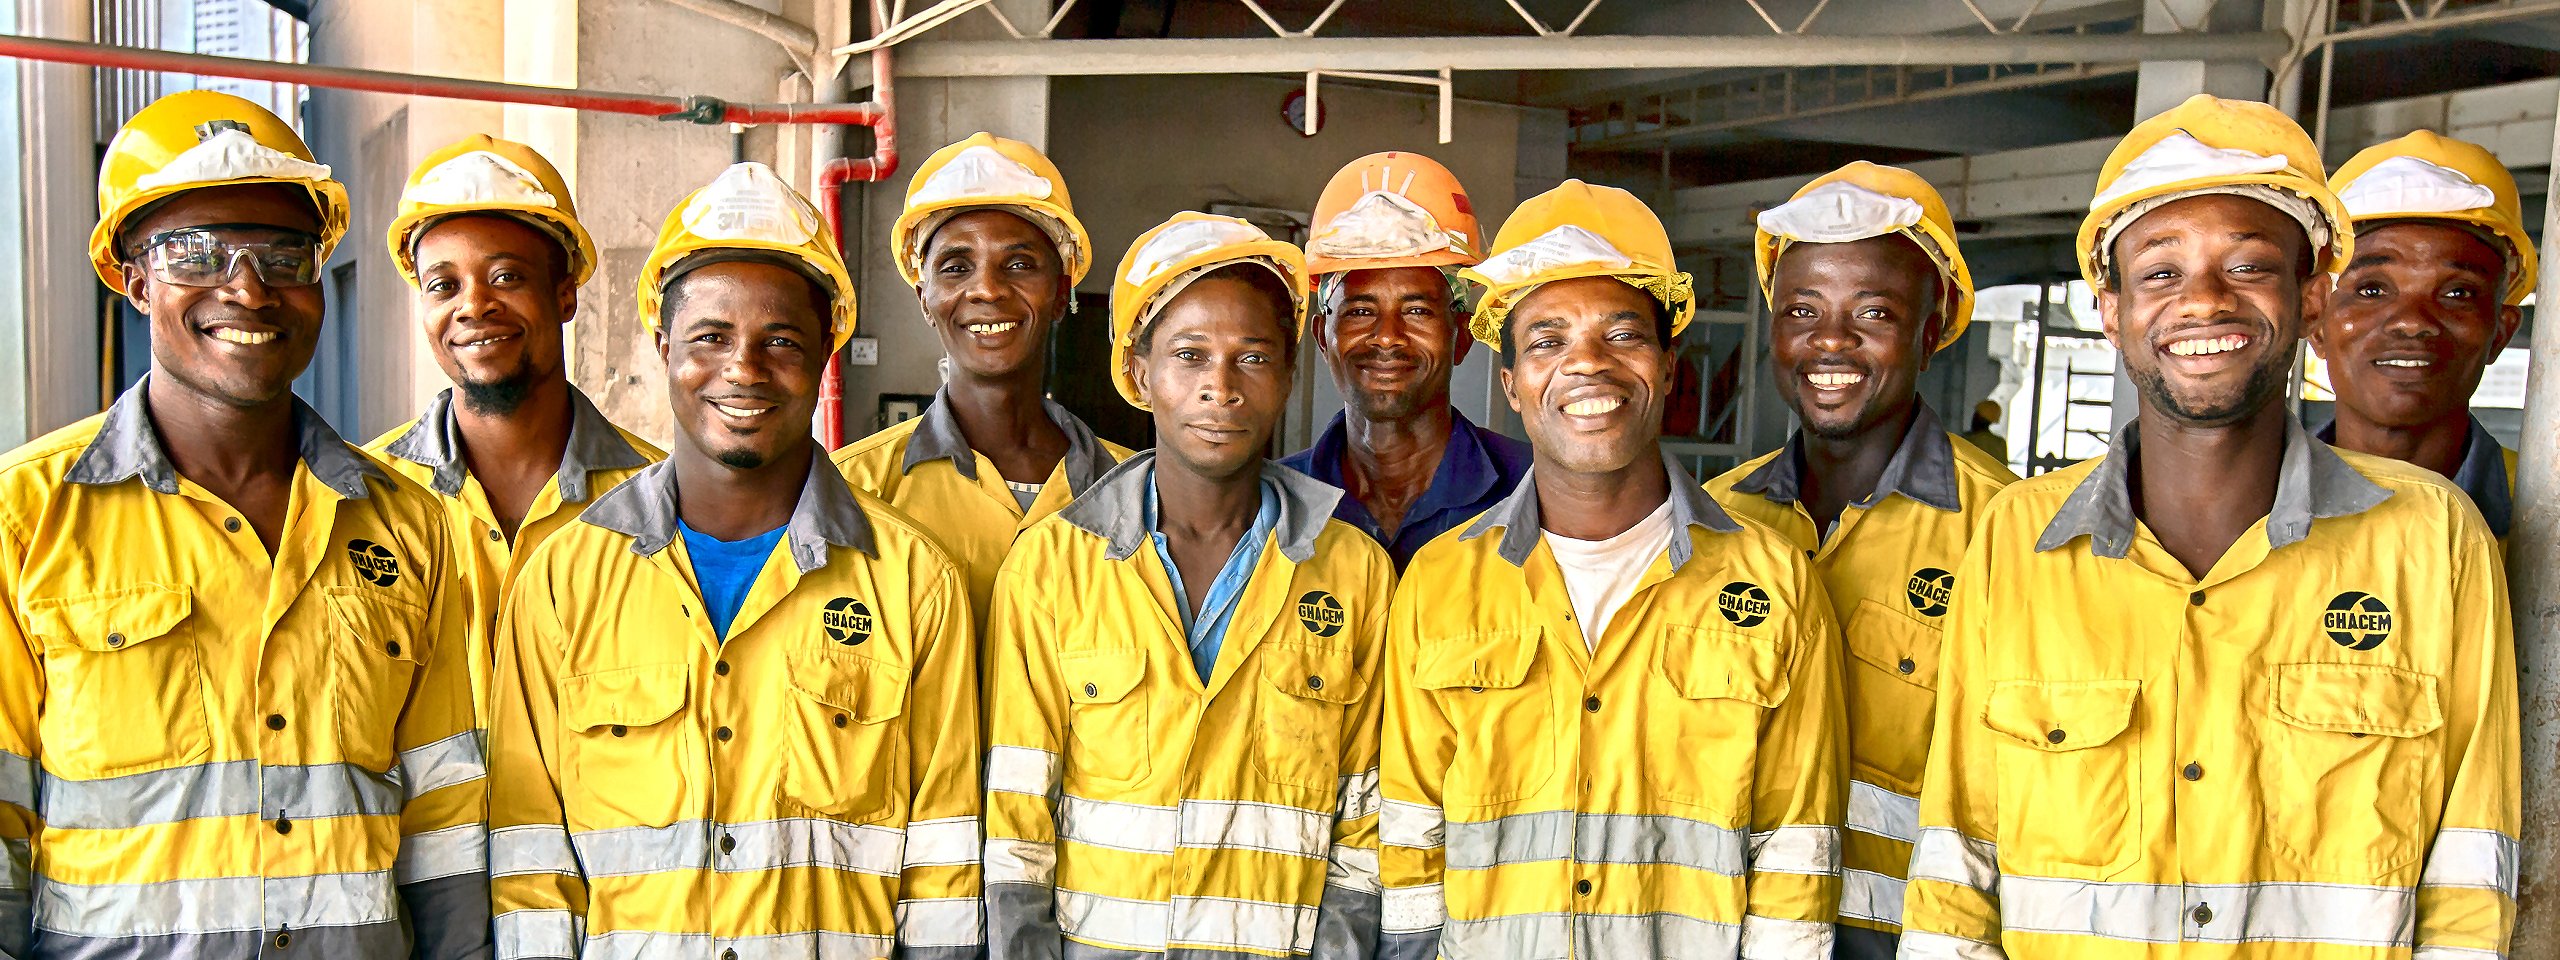 Ten construction workers from Africa are smiling into the camera